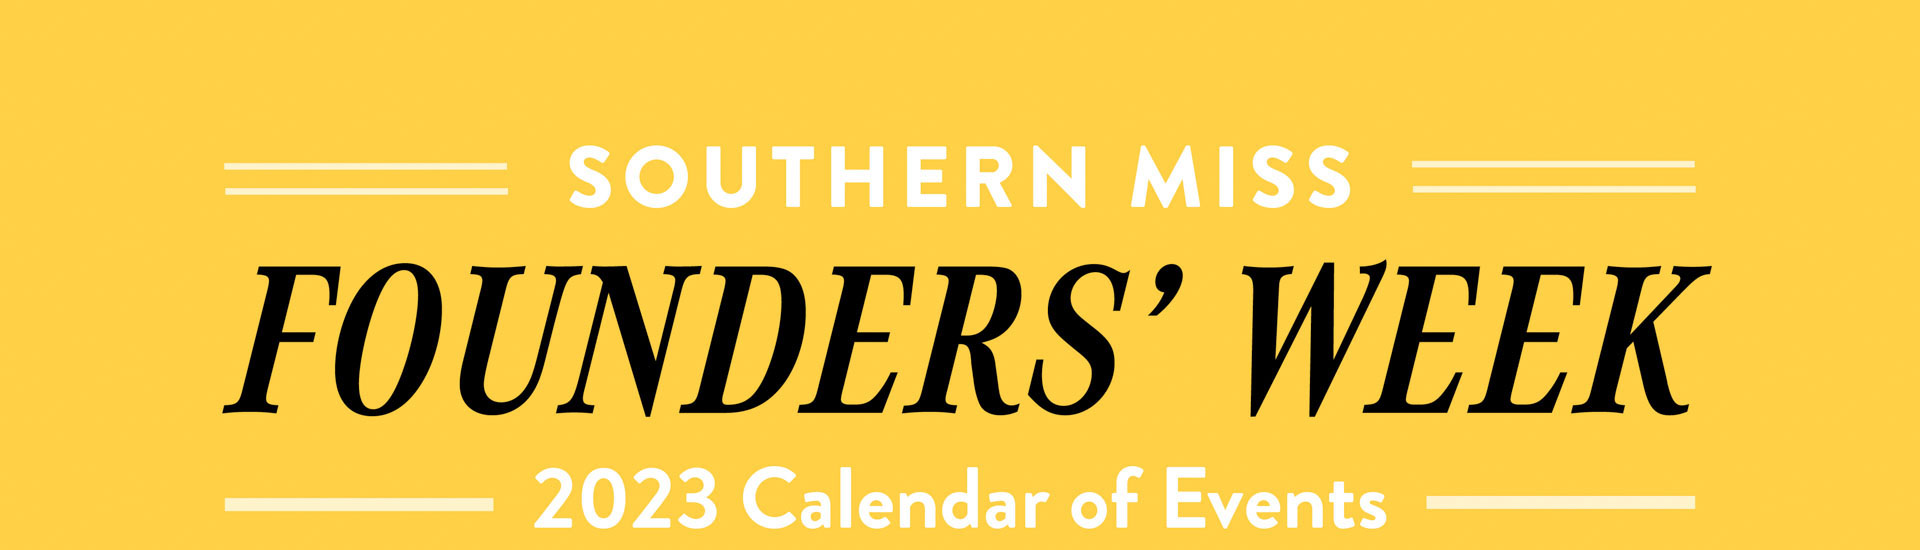 Southern Miss Founder's Week Calendar of Events 2023